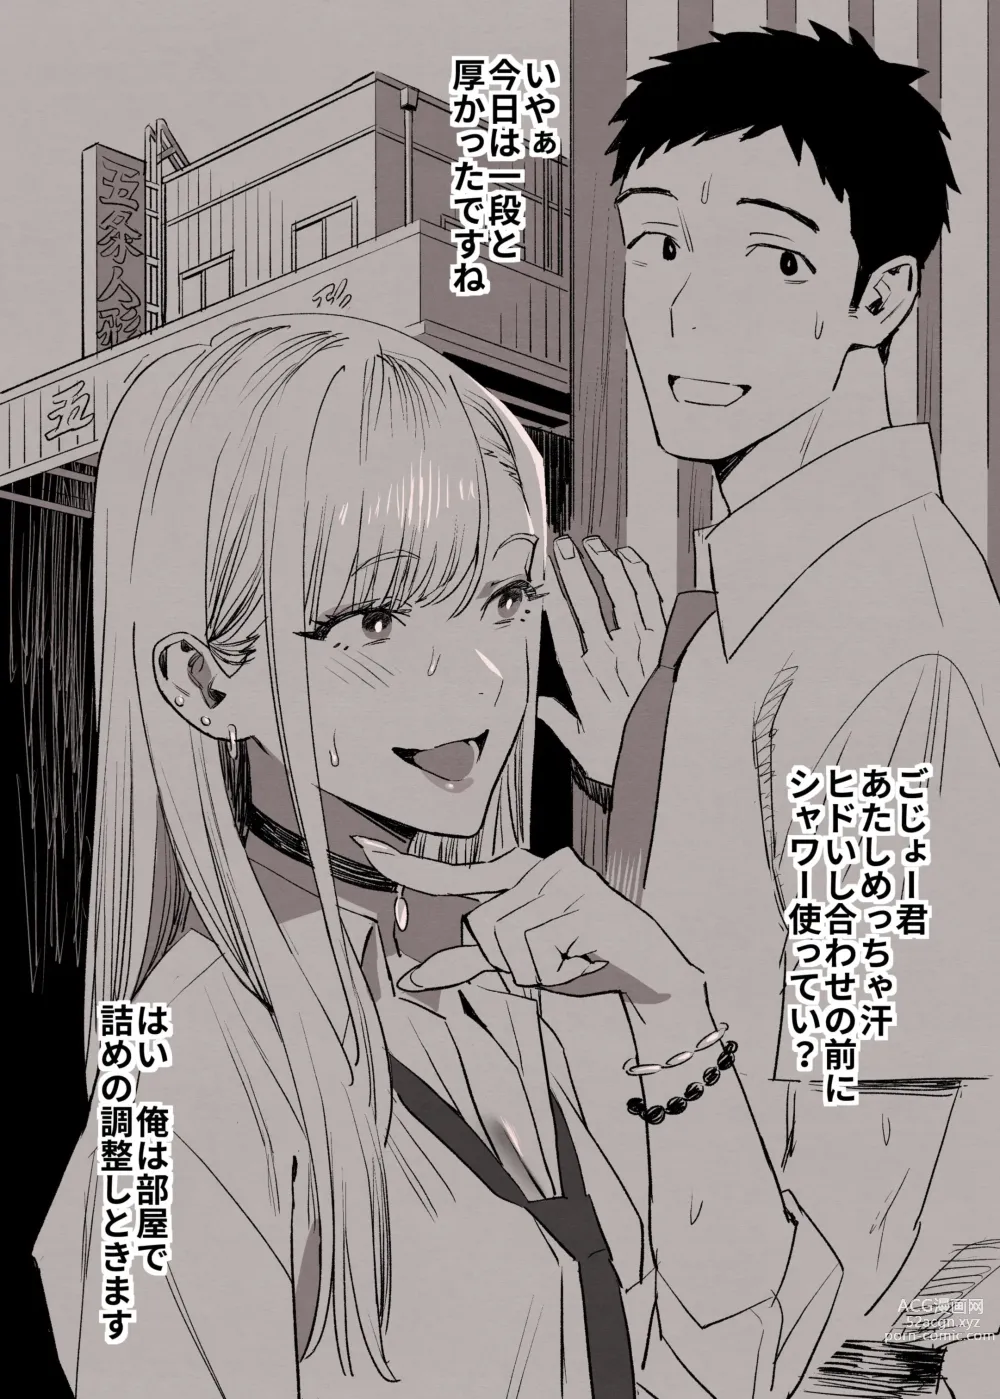 Page 1 of doujinshi Dressing in love part 2